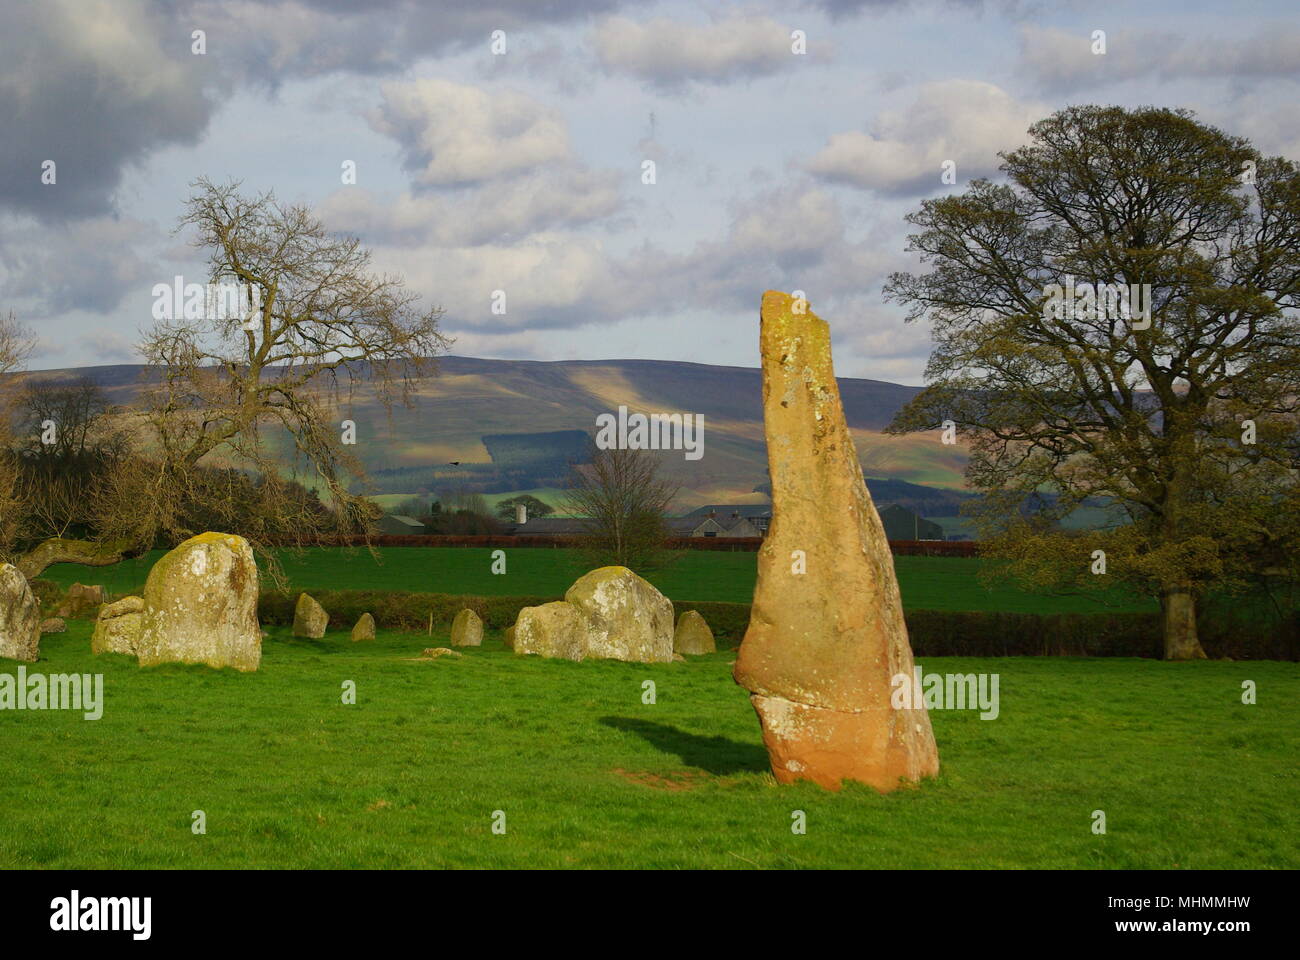 Long Meg and Her Daughters, near Penrith and Little Salkeld, Cumbria.  This is the third largest stone circle in England, composed of an oval ring measuring 300 by 360 feet, and several large outlying stones, the largest and tallest of these being Long Meg, the &quot;mother stone&quot;.       Date: April 2009 Stock Photo